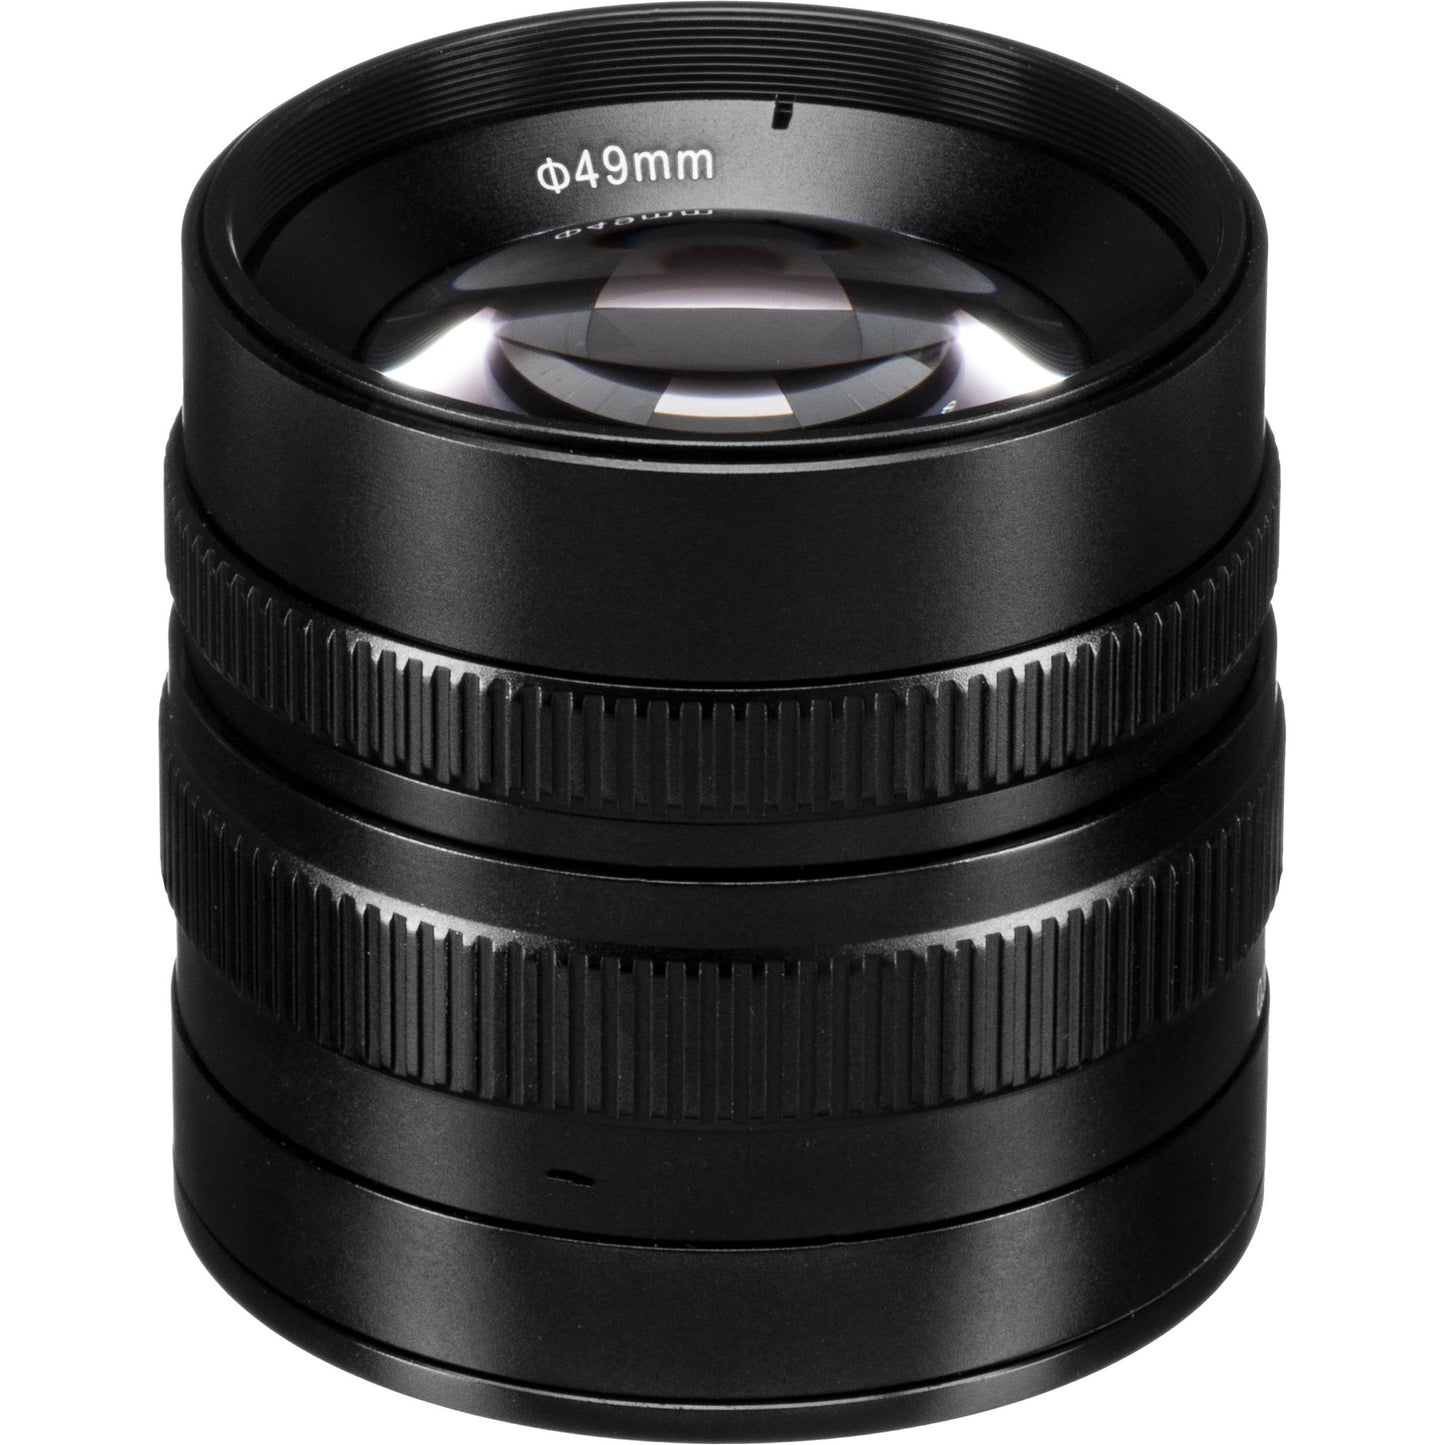 7Artisans 55mm f1.4 Photoelectric APS-C Manual Prime Lens for Panasonic/Olympus Micro Four Thirds MFT M4/3 Mirrorless Cameras with Bokeh Effect